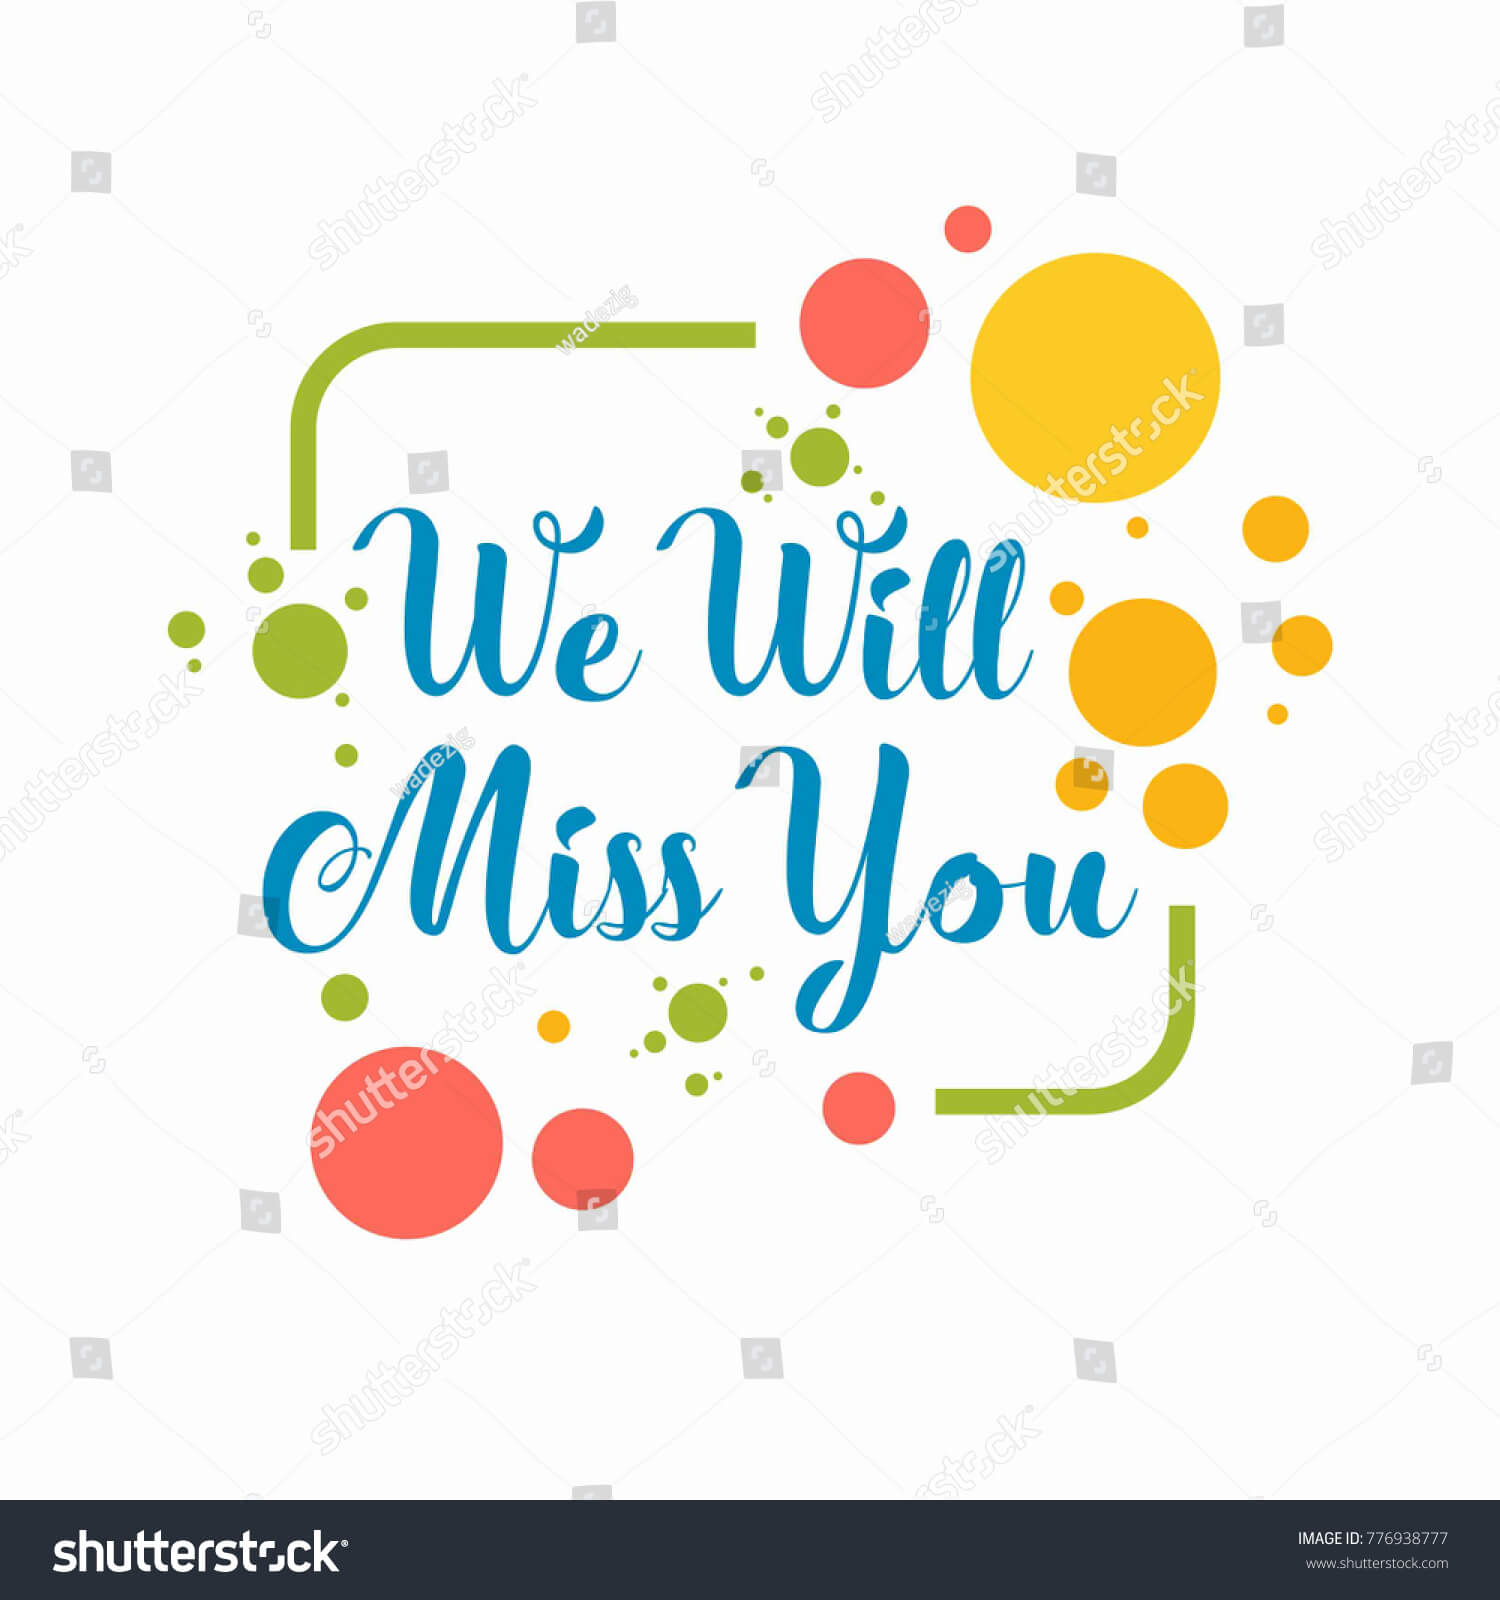 Farewell Images, Stock Photos & Vectors | Shutterstock Throughout Goodbye Card Template